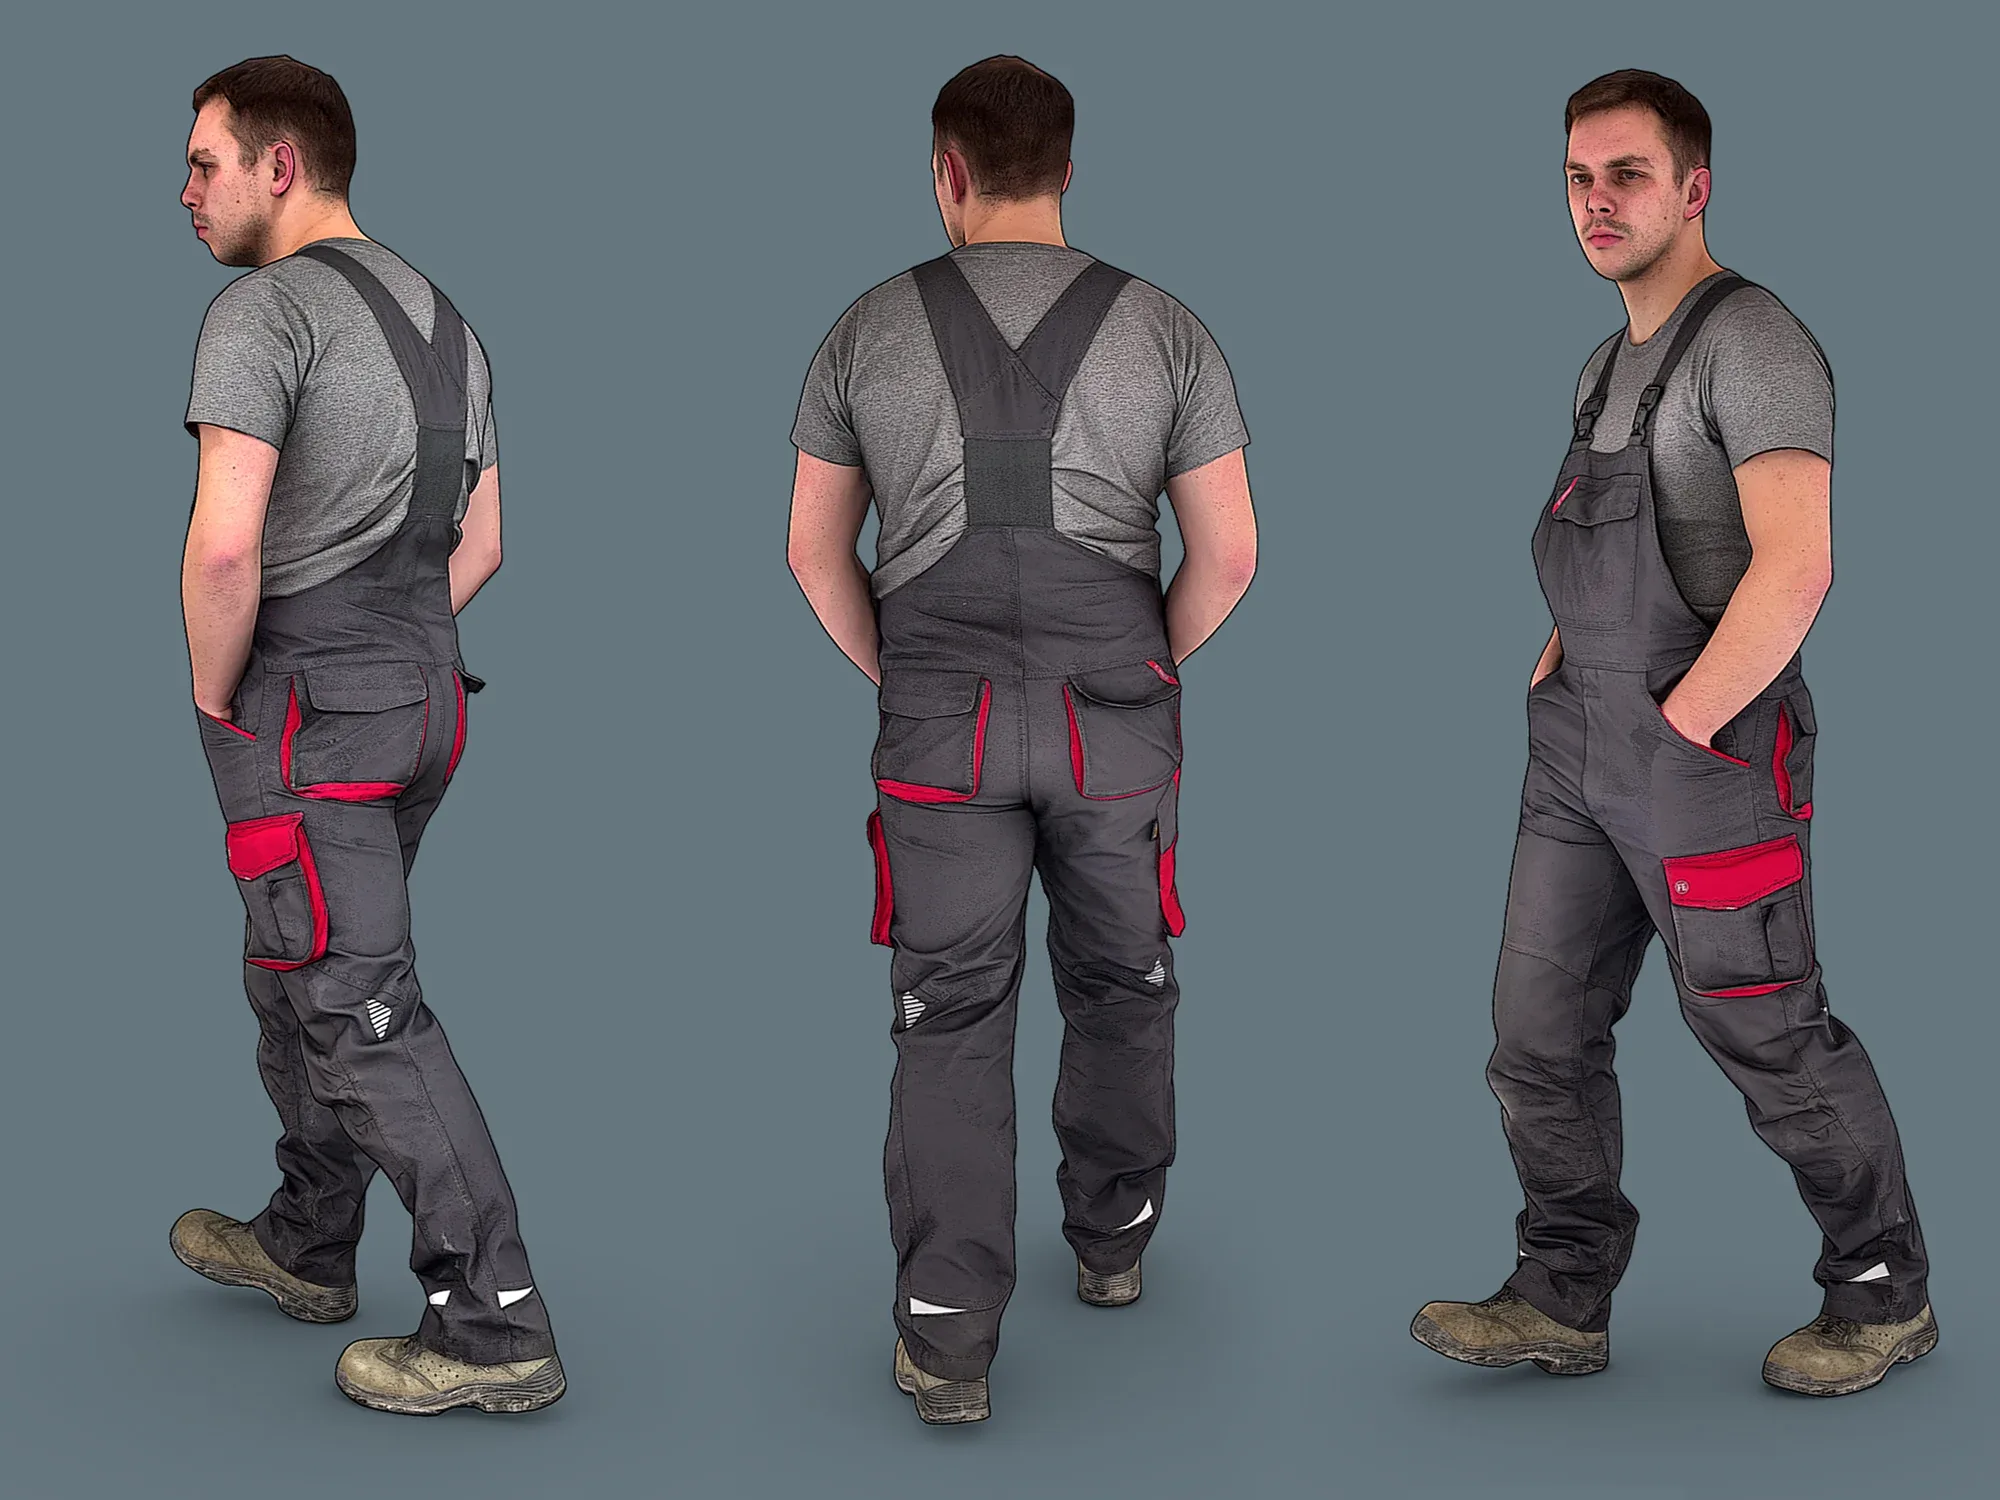 Foreman in Overalls model pack